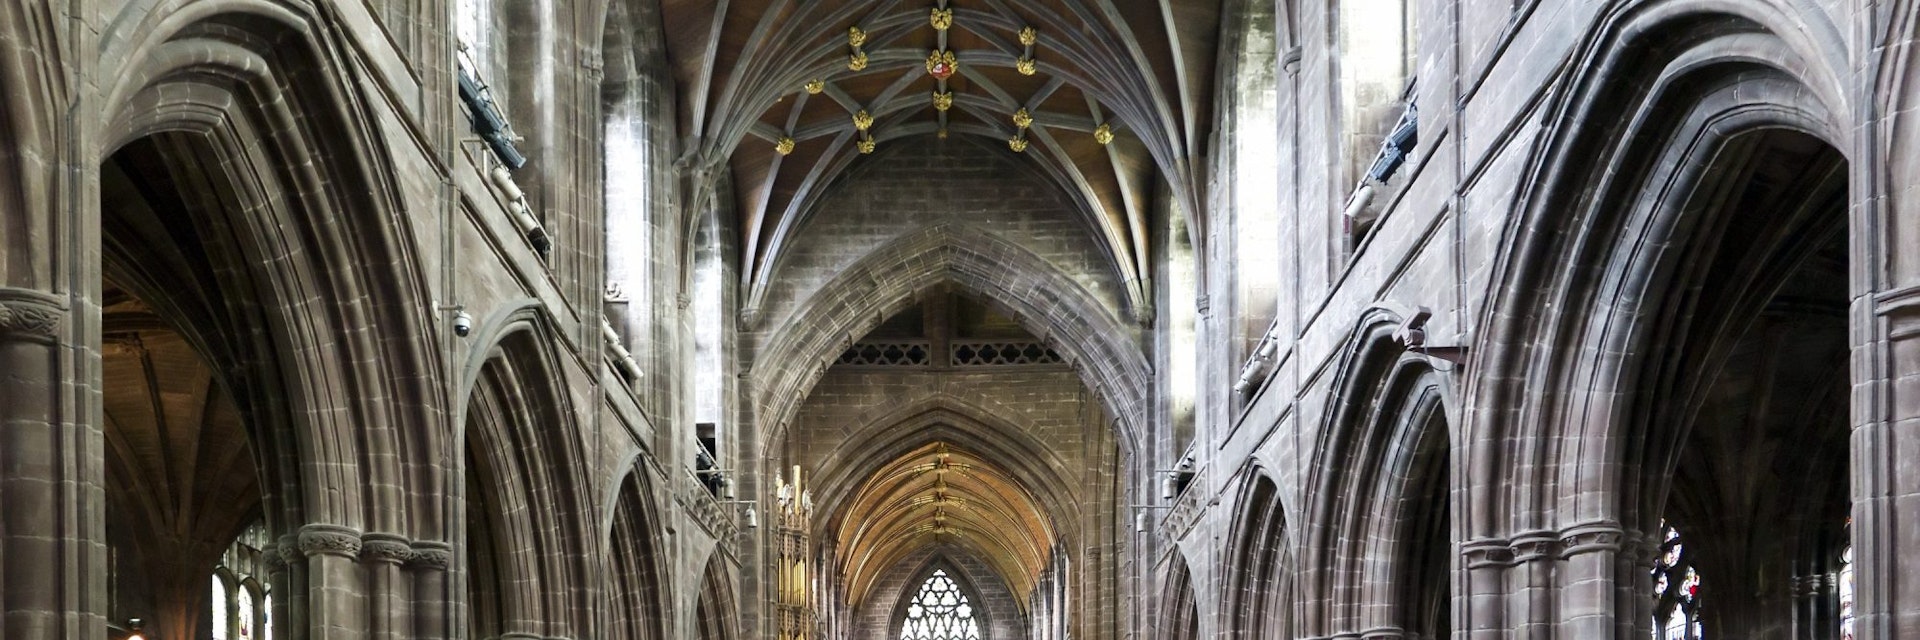 The gothic cathedral in Chester, UK